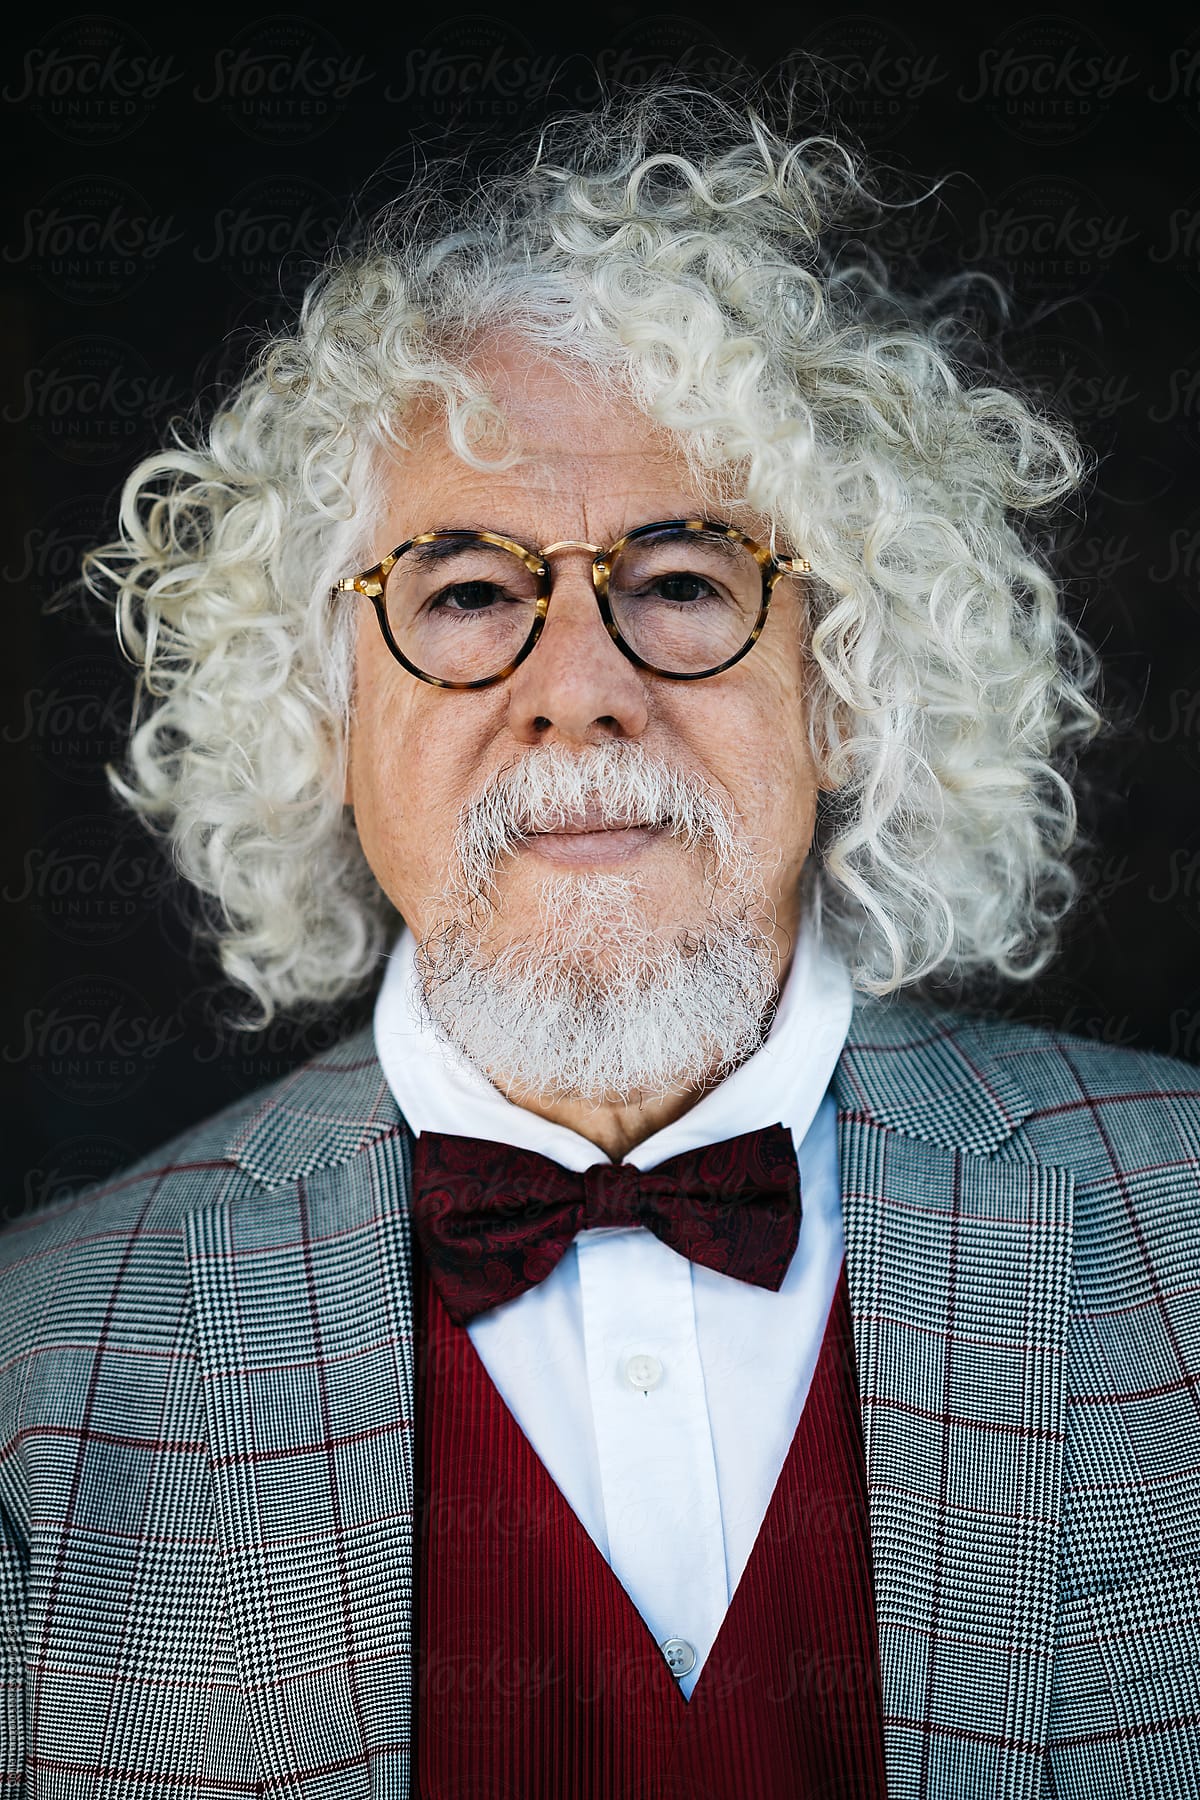 Elegant man with white curly hair in glasses.